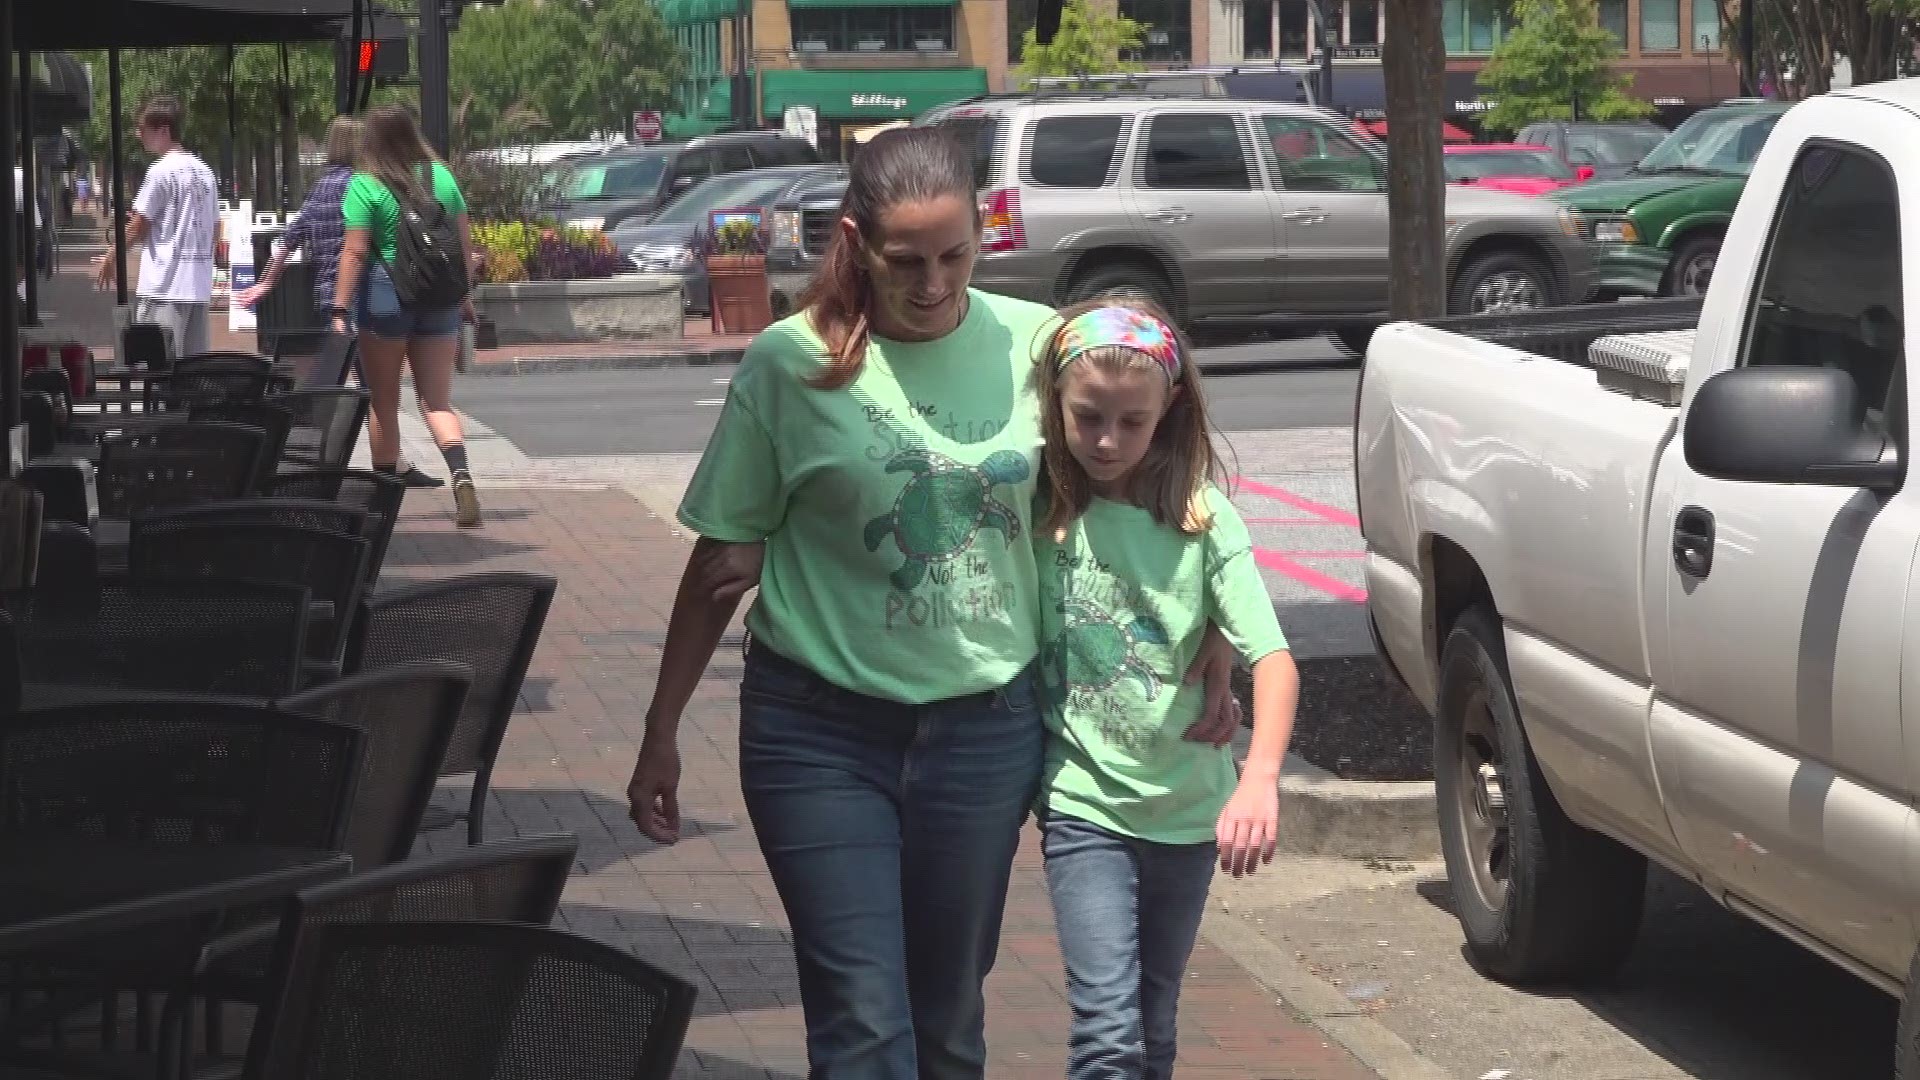 A mother-daughter team is covering a lot of ground in Cobb County, after the daughter became interested in community service projects.